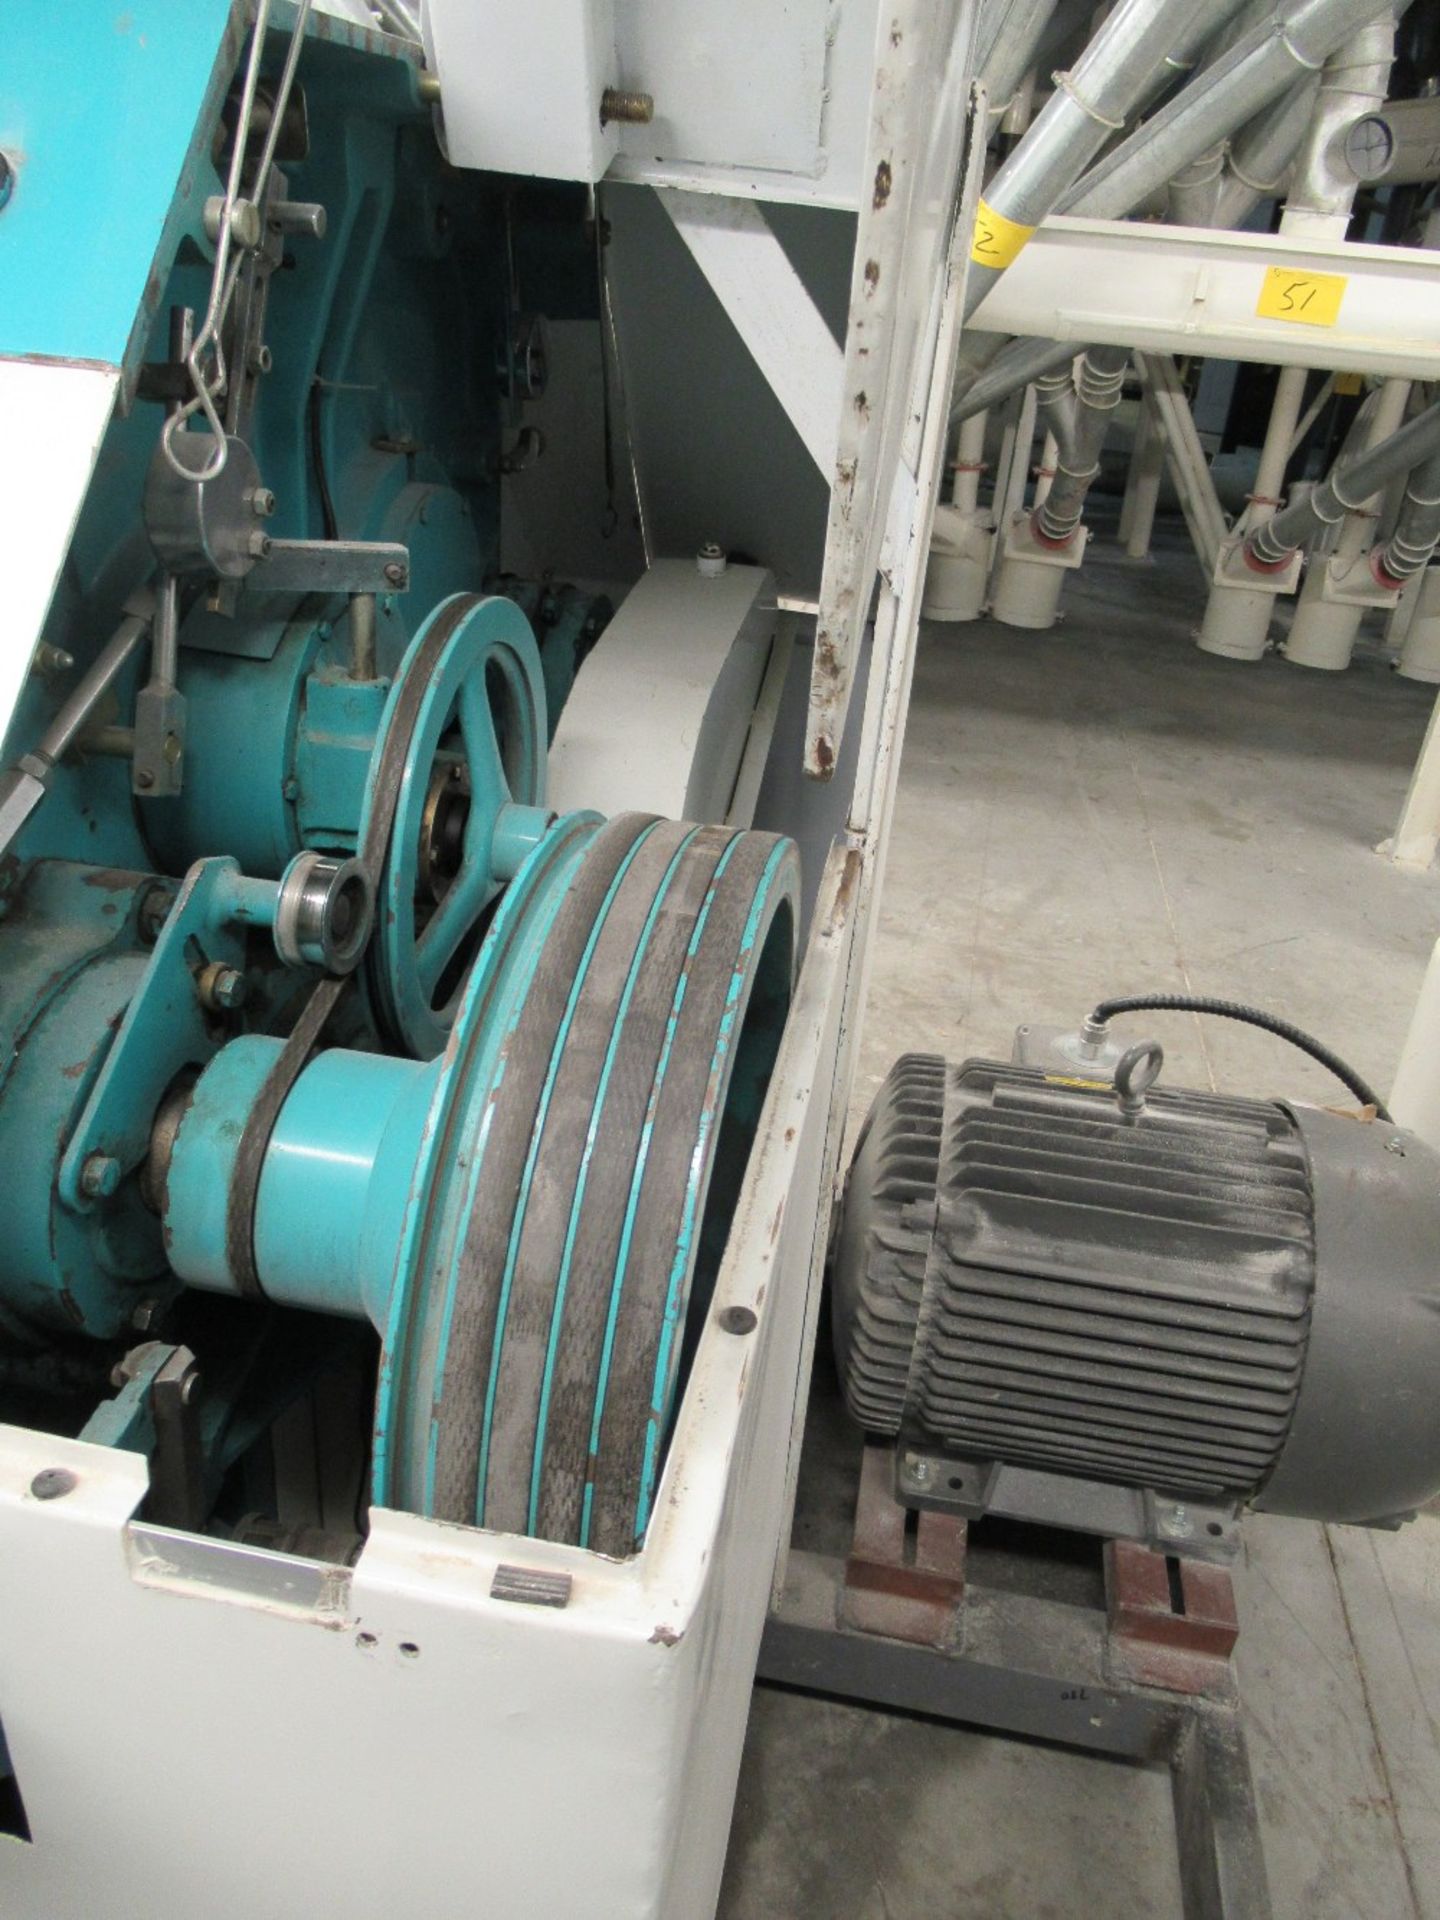 2001 INDOPOL MM-1PRM04, 40"X10" APPROX. DOUBLE ROLLER GRINDING MILL, 1 - 20 HP, 1 - 15 HPMOTORS S/N: - Image 4 of 5